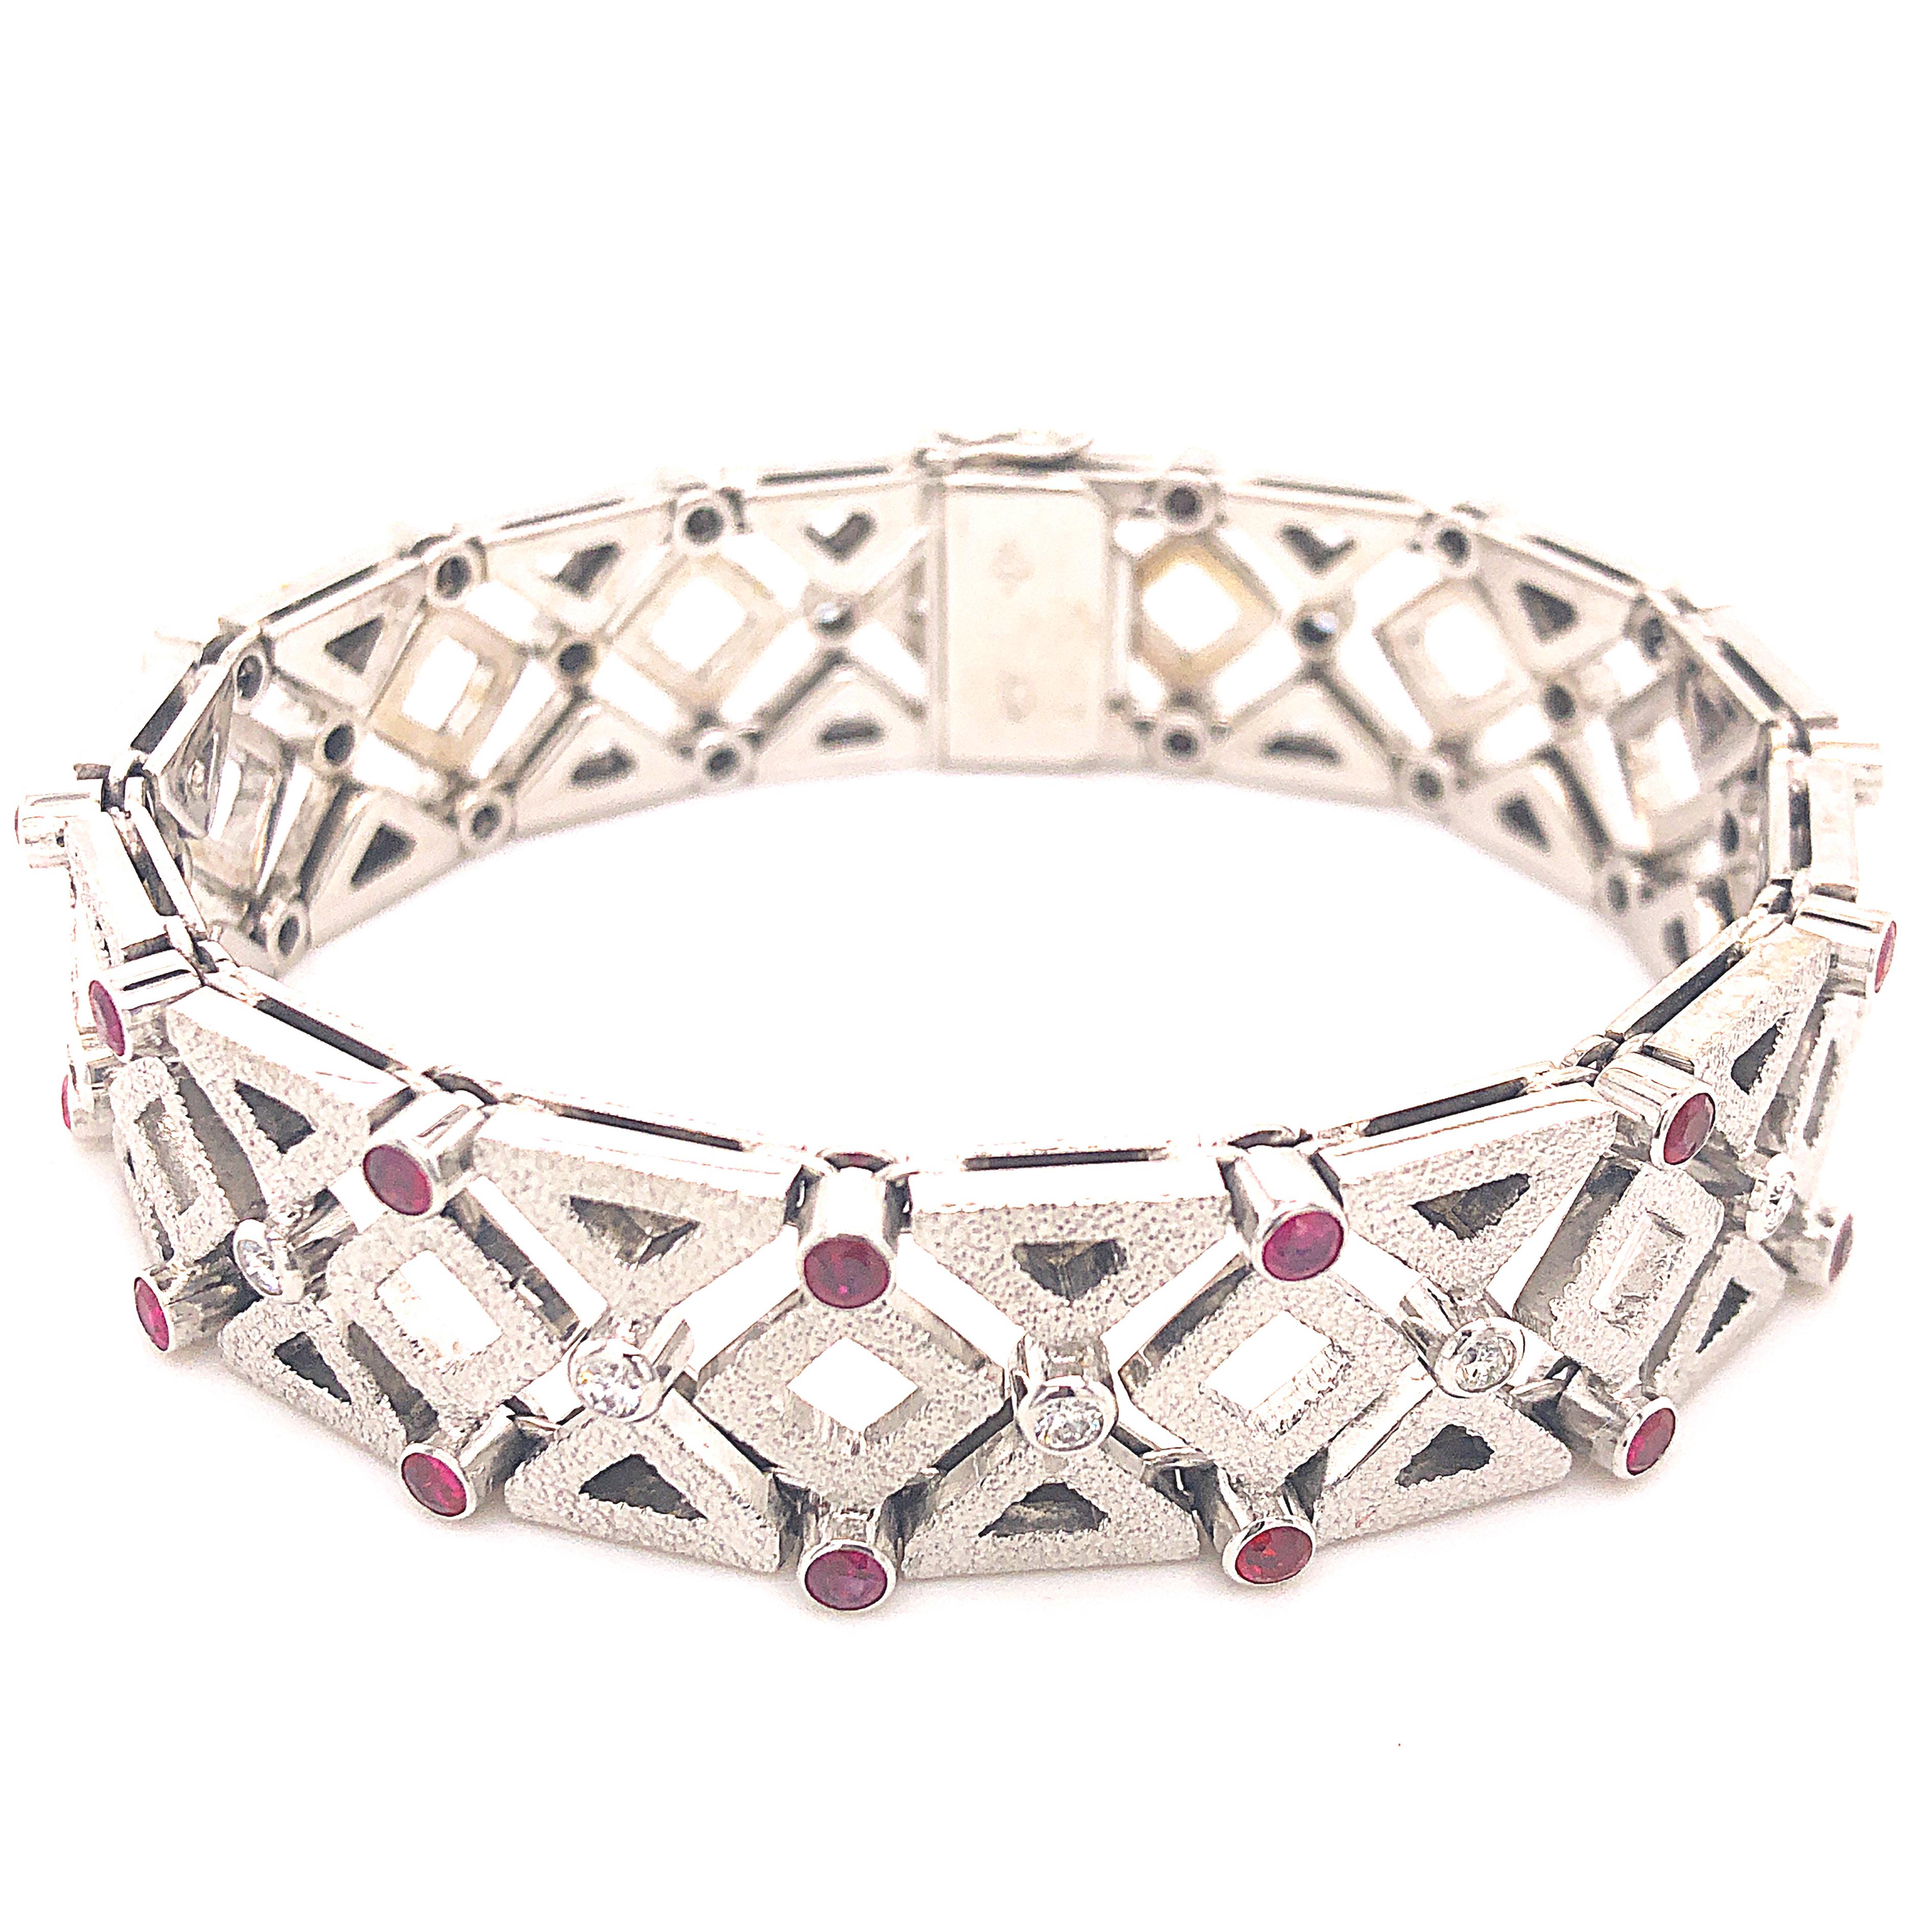 Unique, Original 1960, absolutely Chic yet Timeless Bracelet featuring 28 Burma Ruby(2.8Kt) and 15(1.20Kt) White Diamond in a White Gold Geometric Motif masterfully Handcrafted Setting(7.20inches, 18.3cm Lenght, 0.6inches, 16mm Height), 60.2g,